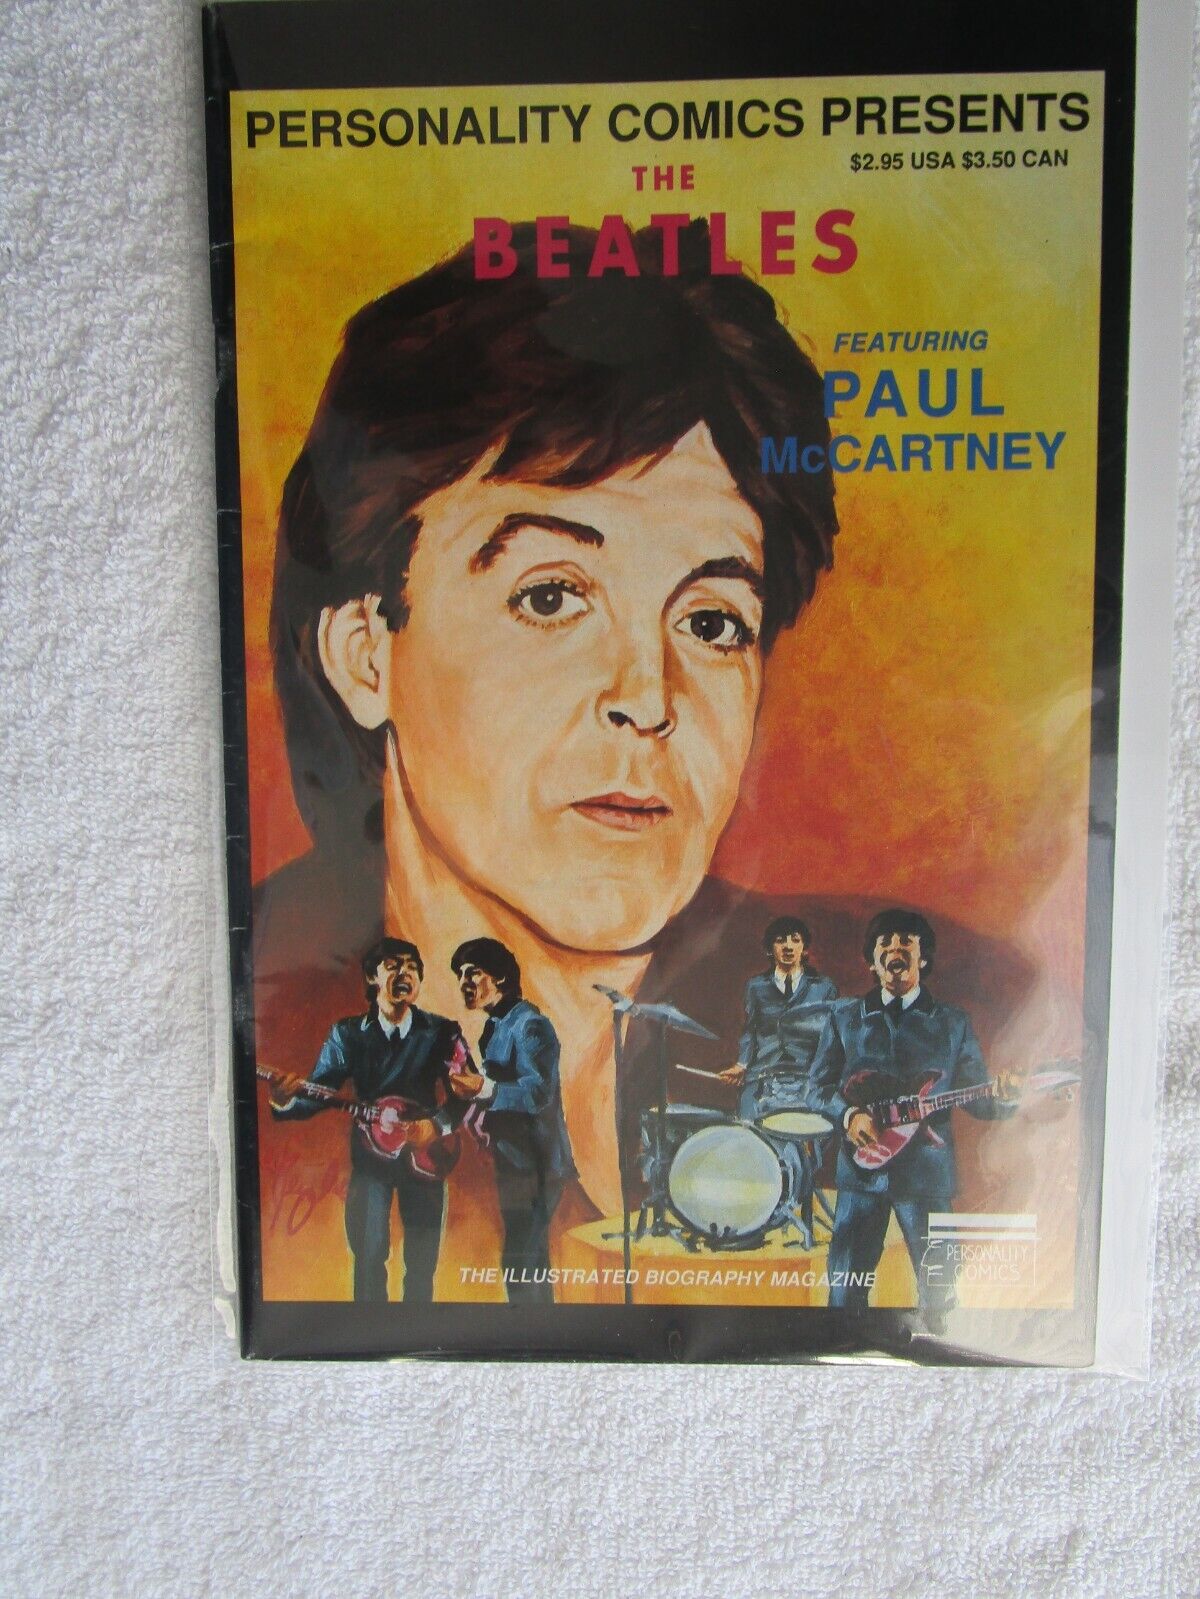 Personality Comics Presents: The Beatles Featuring Paul McCartney (1991)